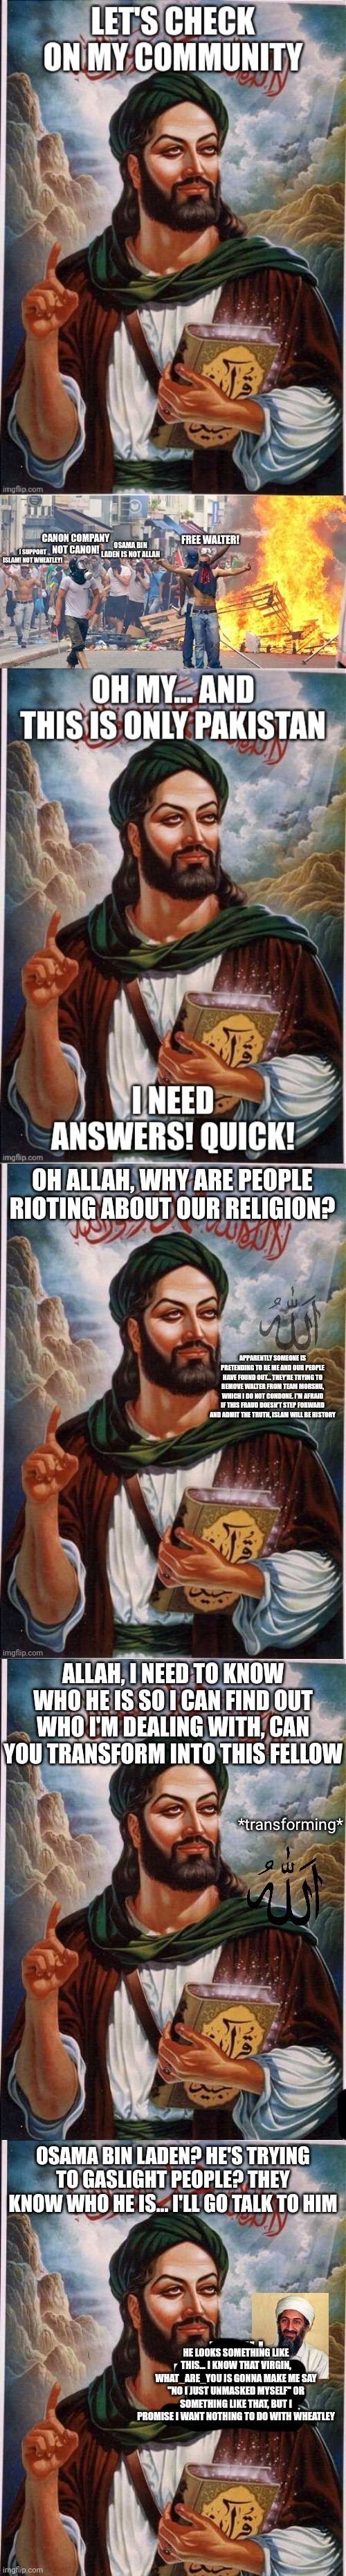 No, you need to stop masquerading Bin Laden as Allah | HE LOOKS SOMETHING LIKE THIS... I KNOW THAT VIRGIN, WHAT_ARE_YOU IS GONNA MAKE ME SAY "NO I JUST UNMASKED MYSELF" OR SOMETHING LIKE THAT, BUT I PROMISE I WANT NOTHING TO DO WITH WHEATLEY | made w/ Imgflip meme maker